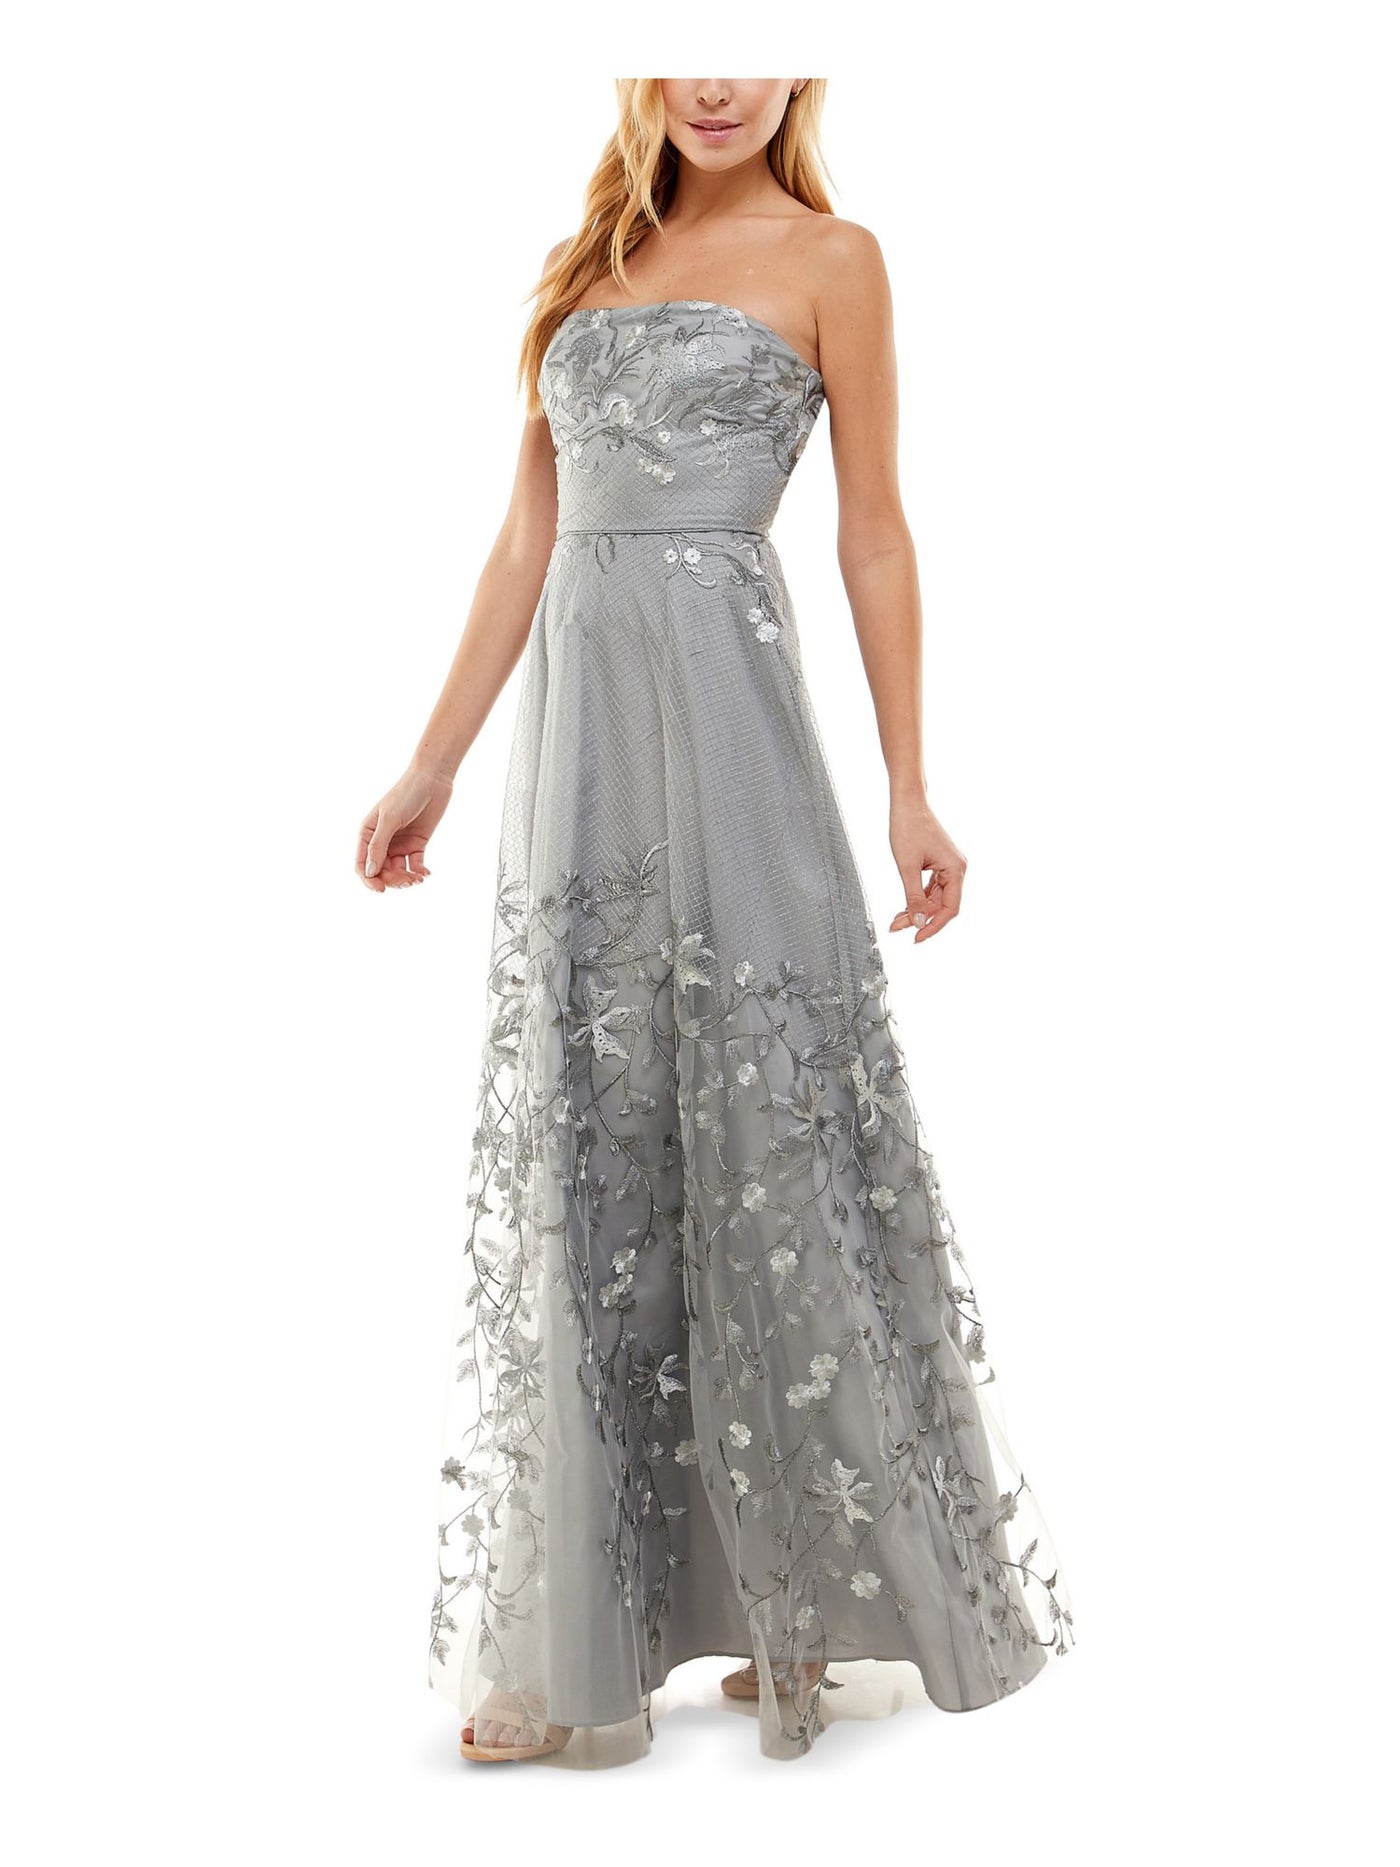 CITY STUDIO Womens Gray Embroidered Lace Zippered Sleeveless Strapless Full-Length  Gown Prom Dress Juniors 1